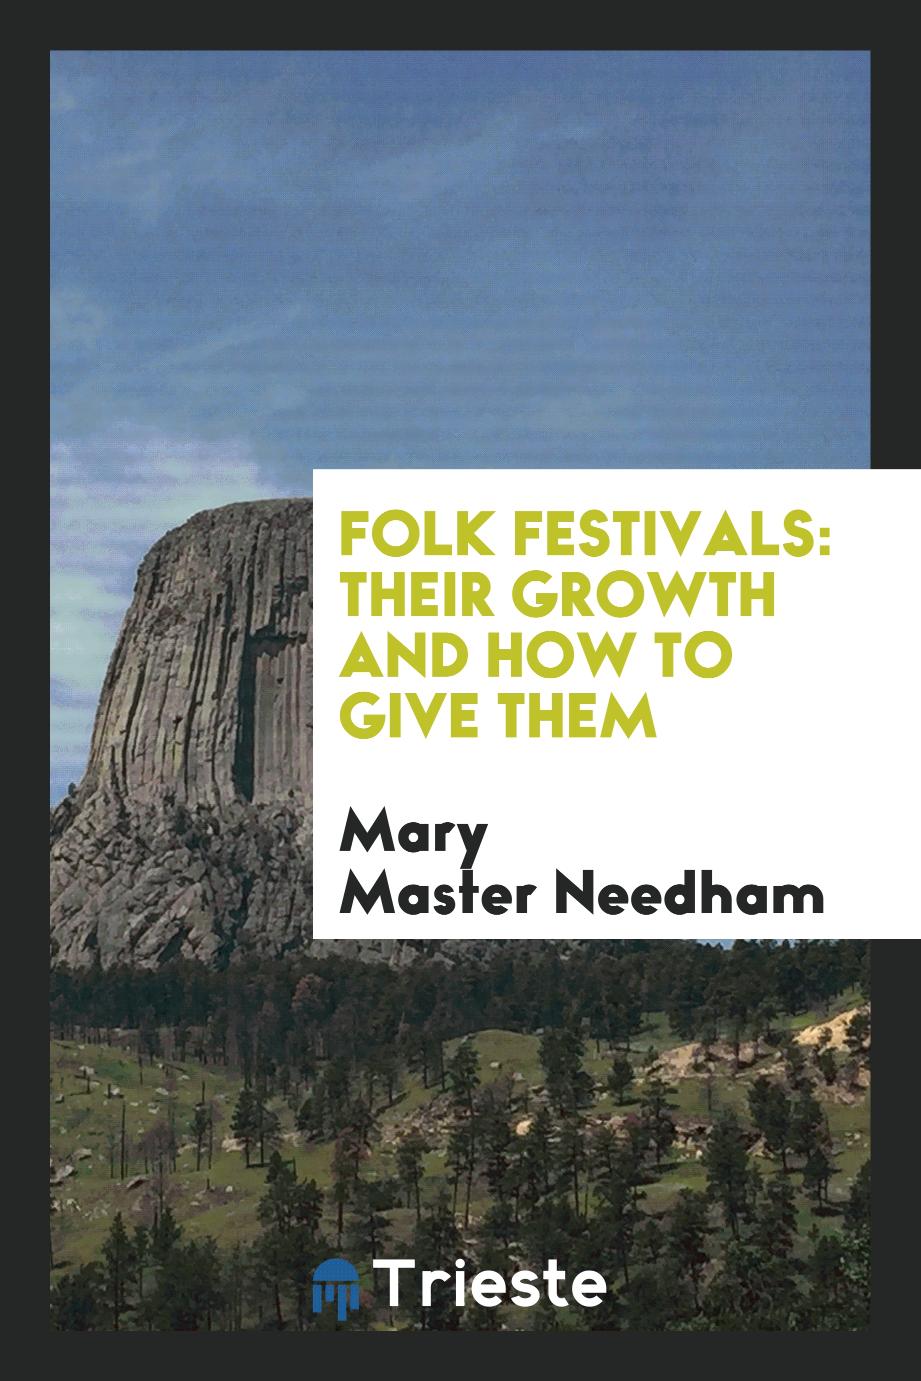 Folk festivals: their growth and how to give them